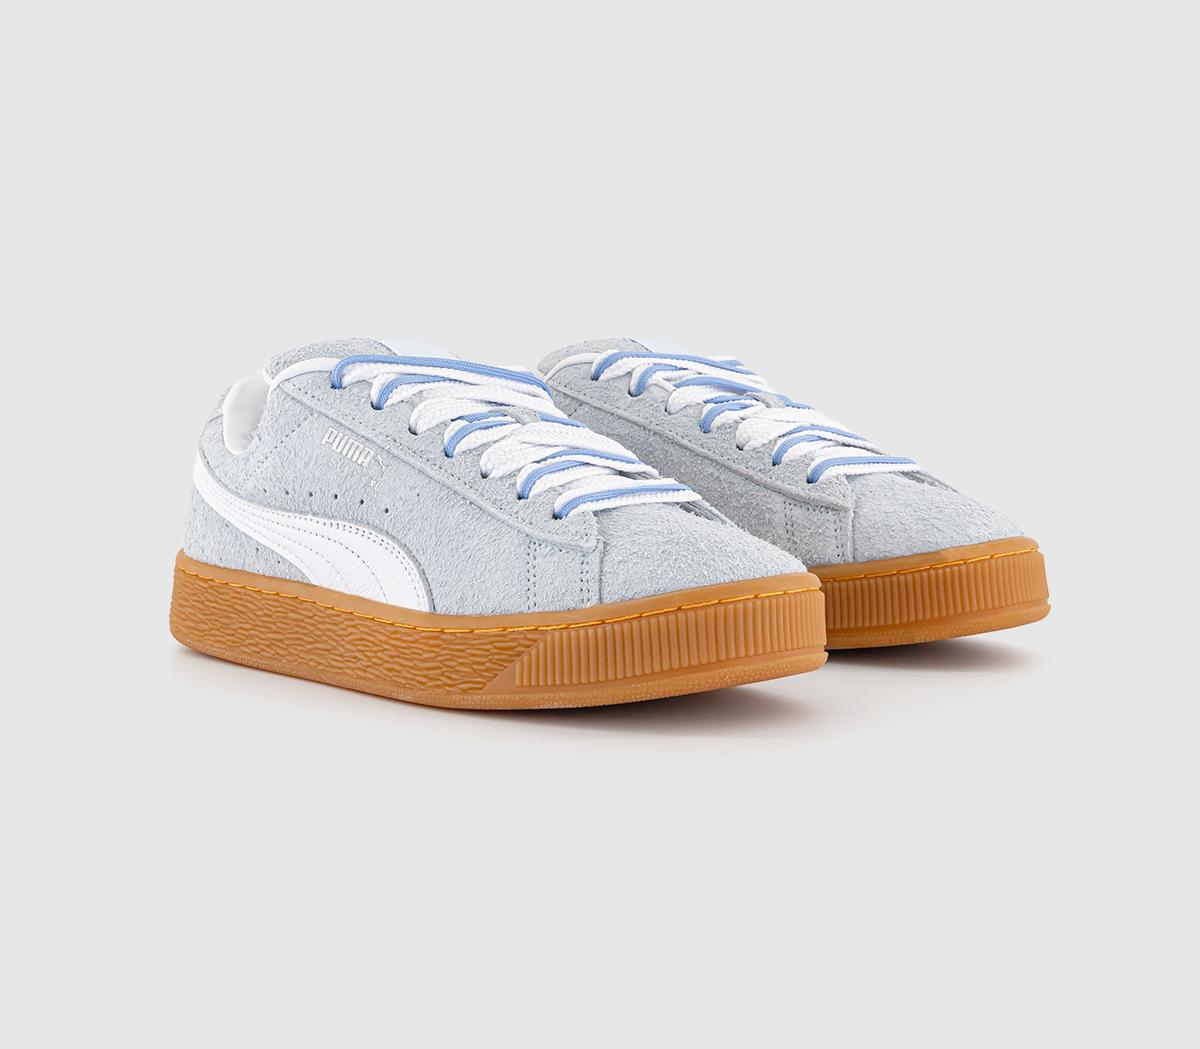 Puma Womens Suede Xl Trainers Icy Blue White Silver, 6.5